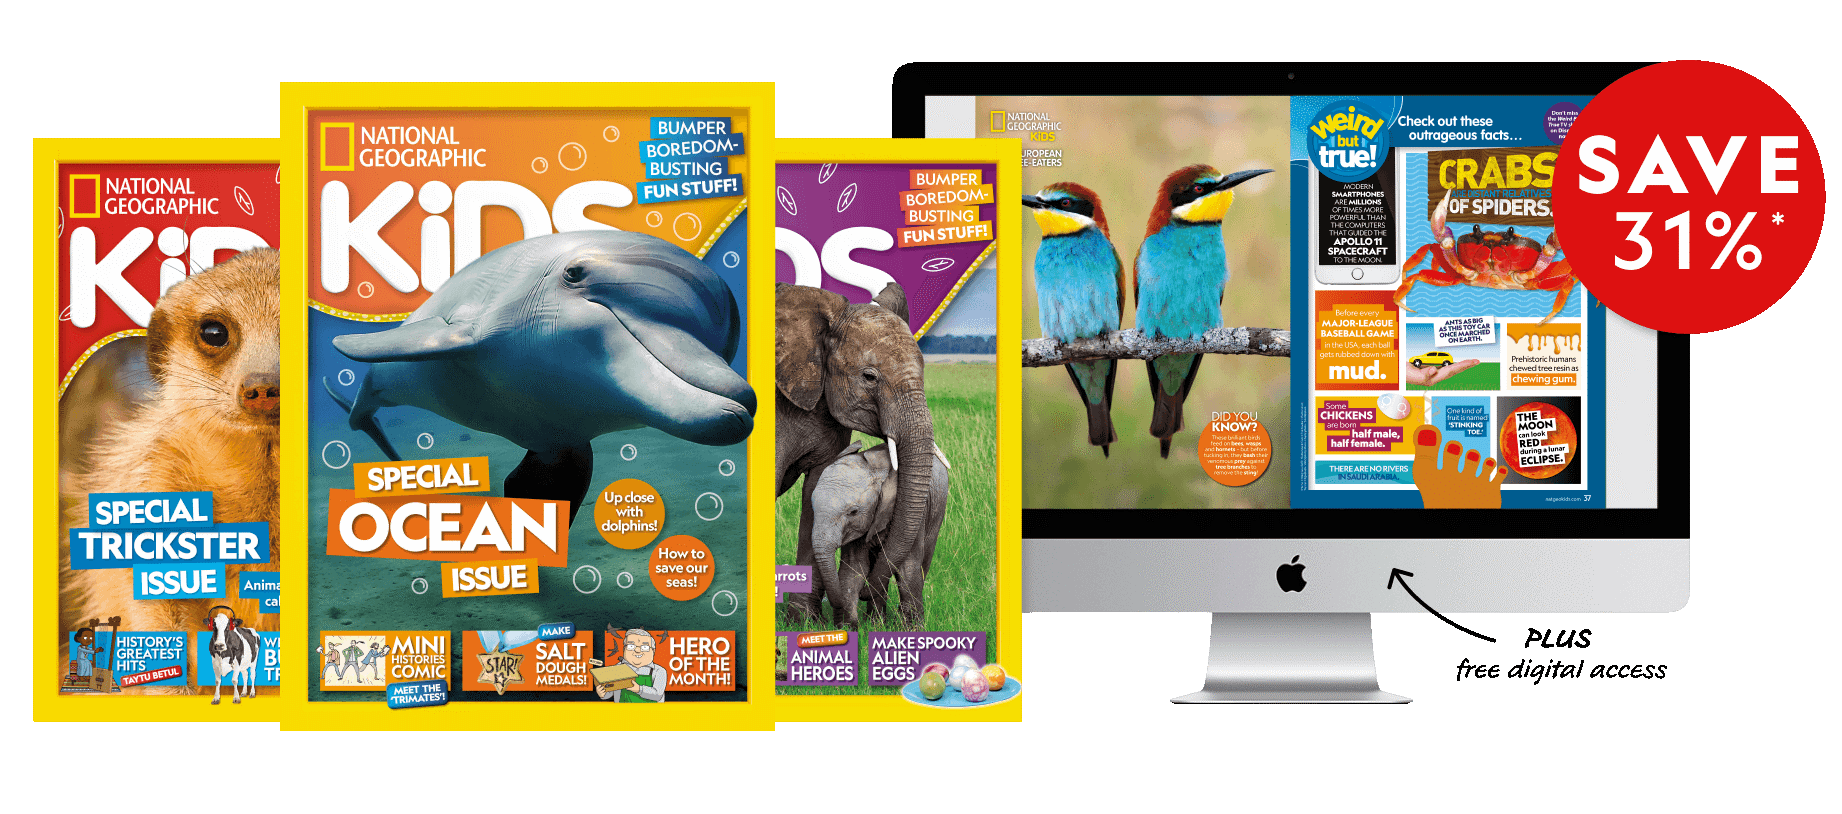 Give kids a flying start with a National Geographic Kids magazine